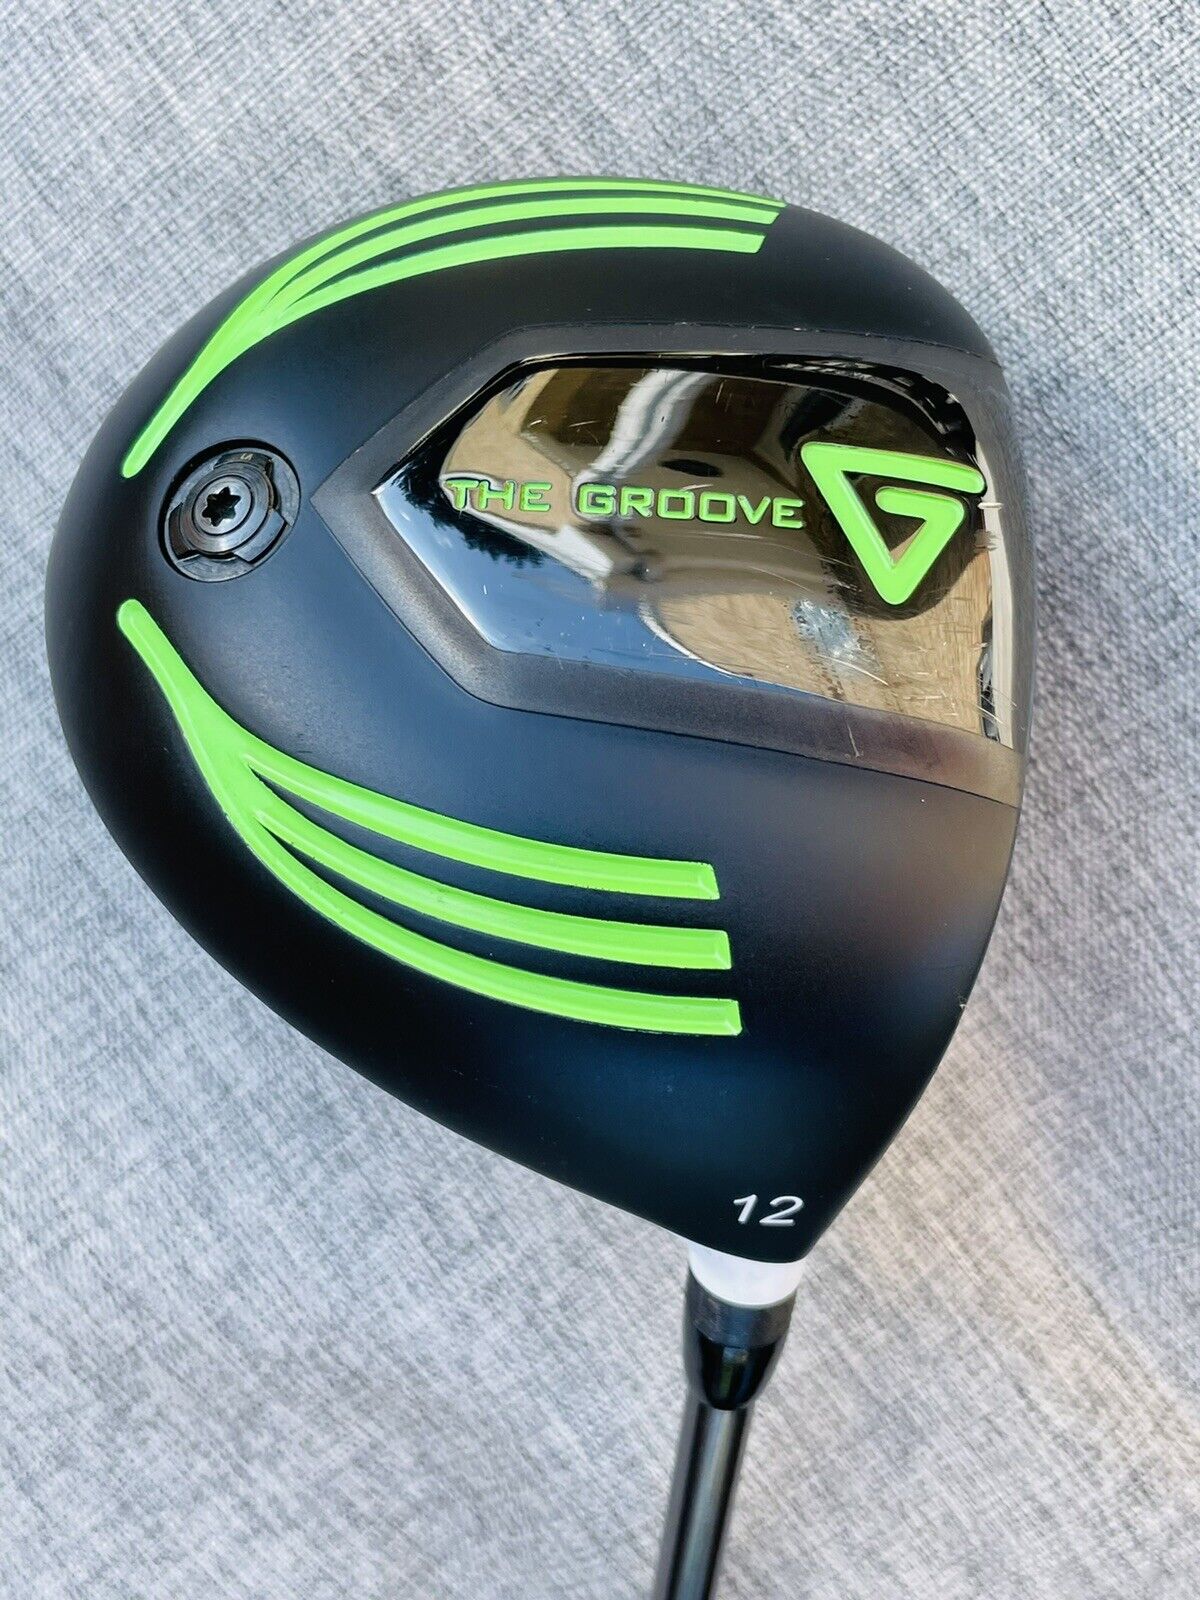 🔥 VGG • The Vertical Groove 12 • Women’s GOlf Driver • Rogue Max 75 S Shaft •